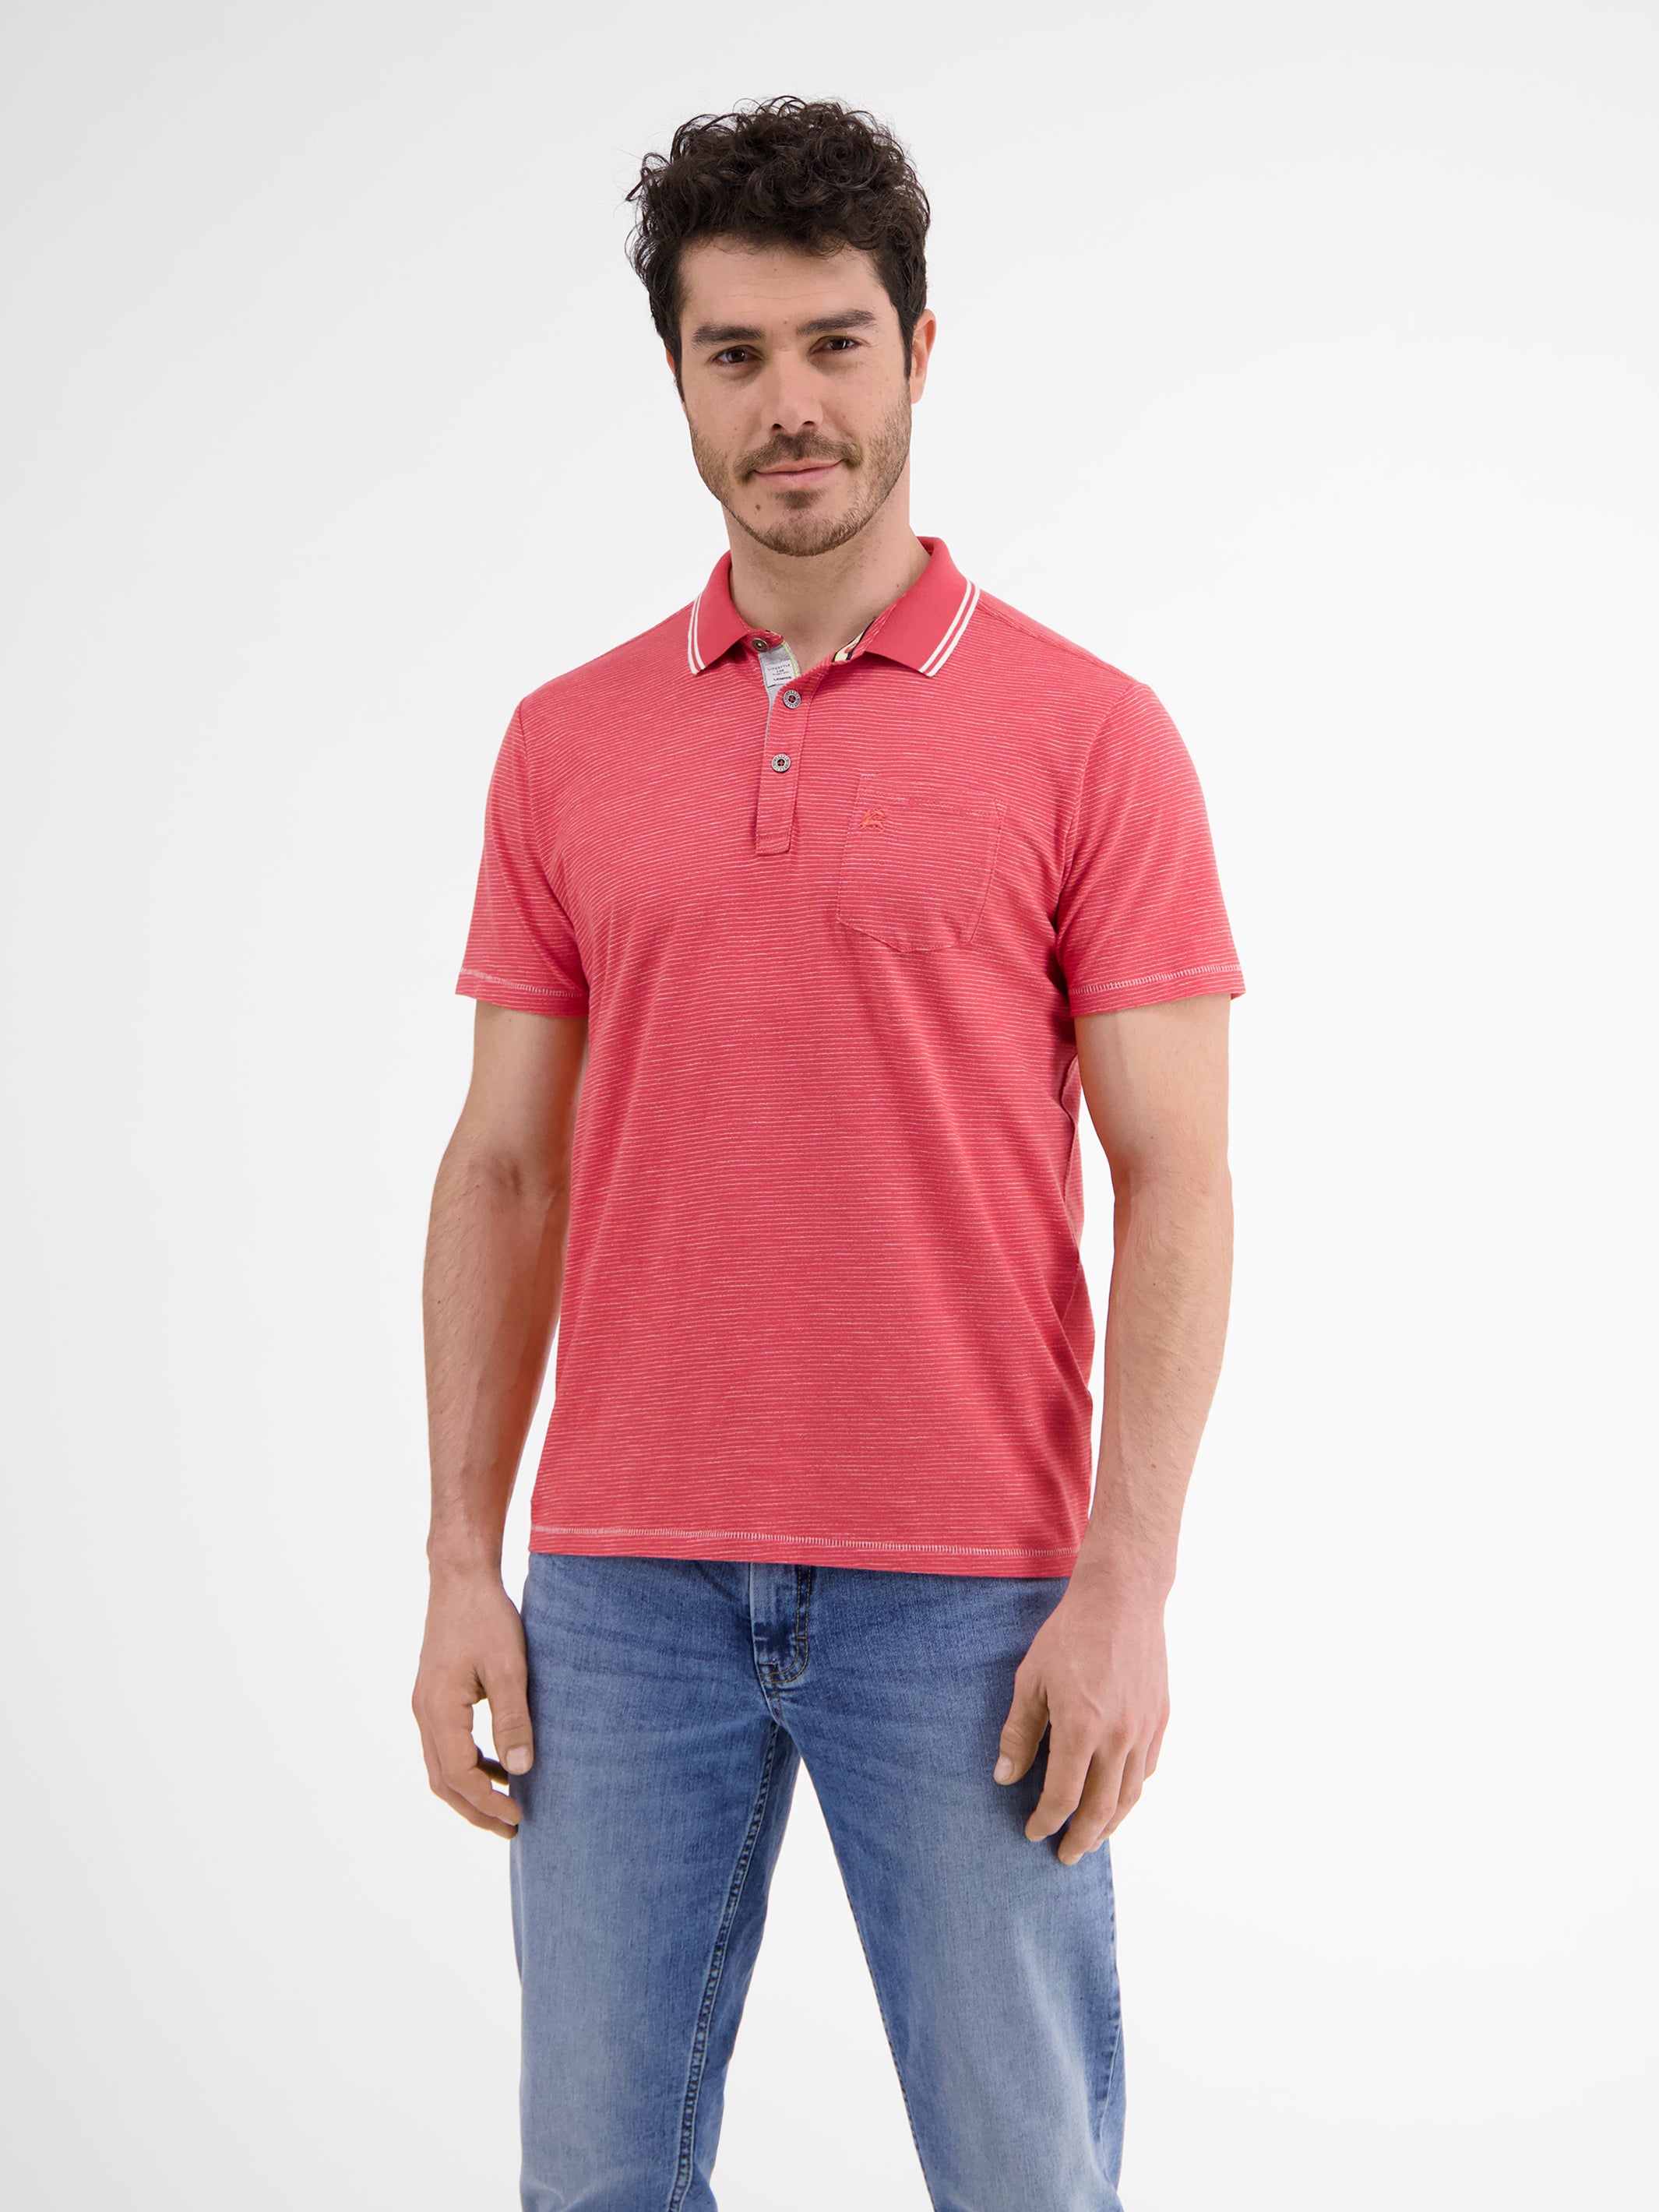 with stripes shirt SHOP LERROS Polo fineliner –